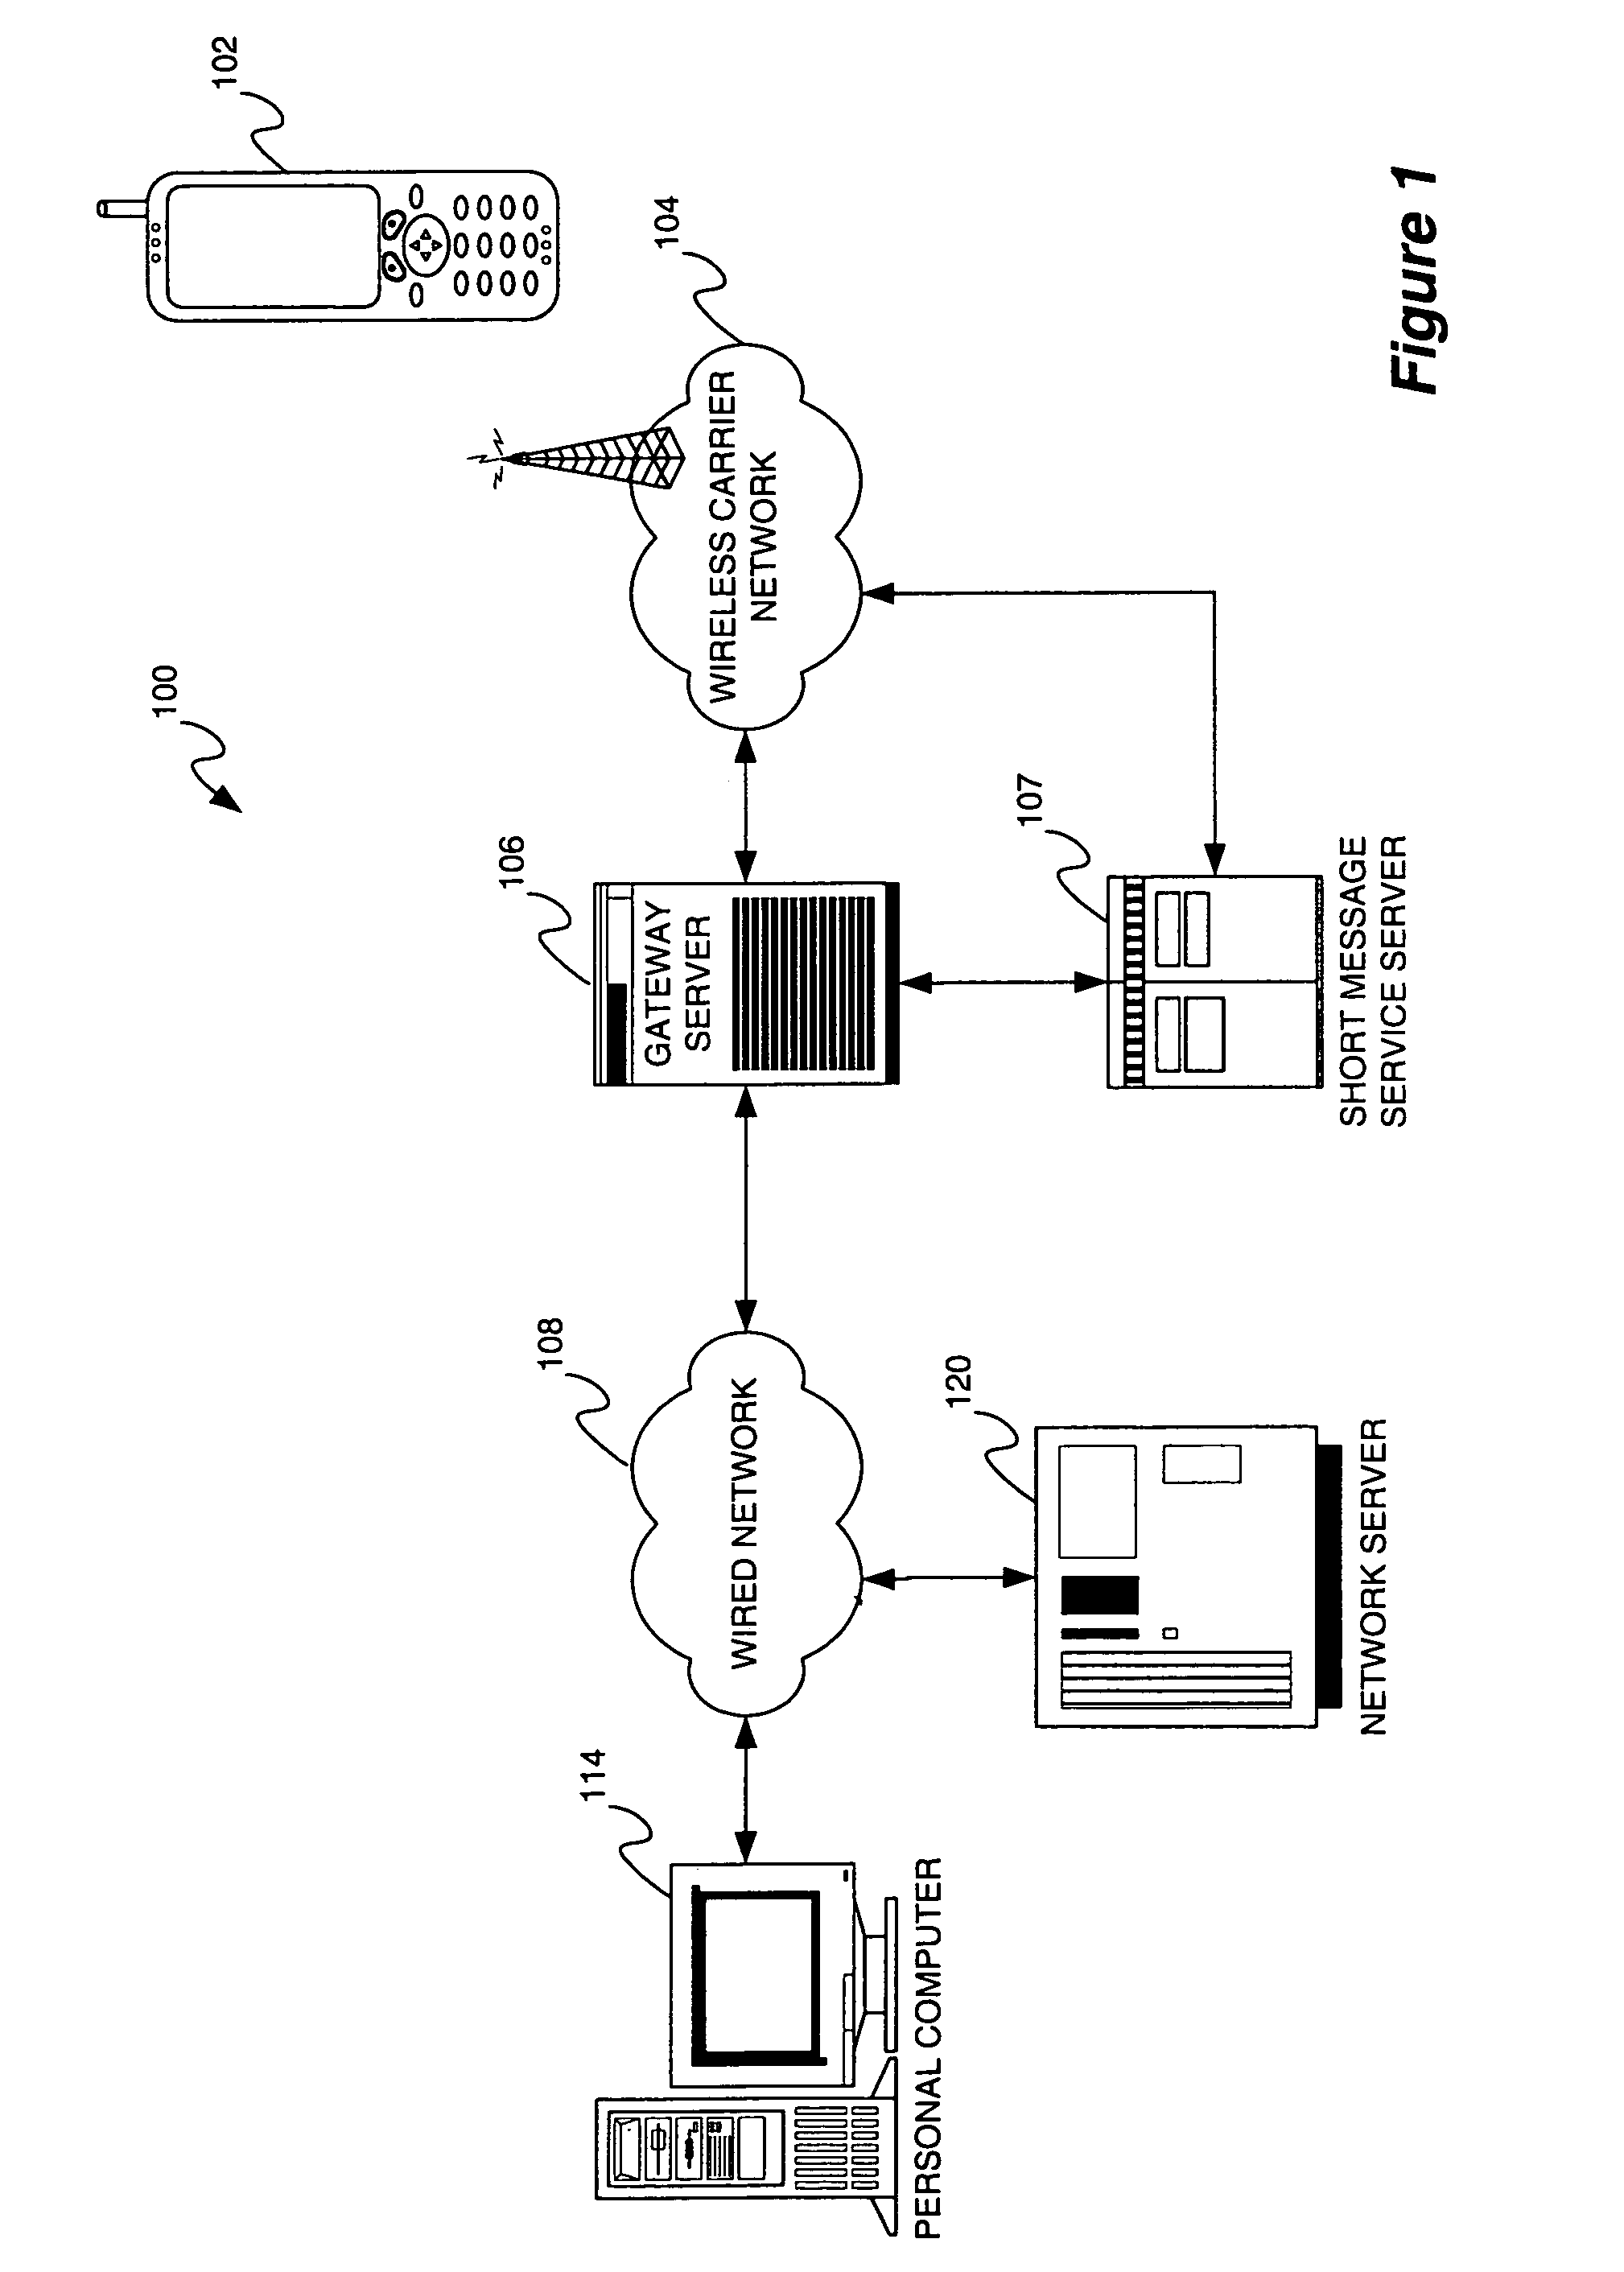 Heuristically assisted user interface for a wireless communication device